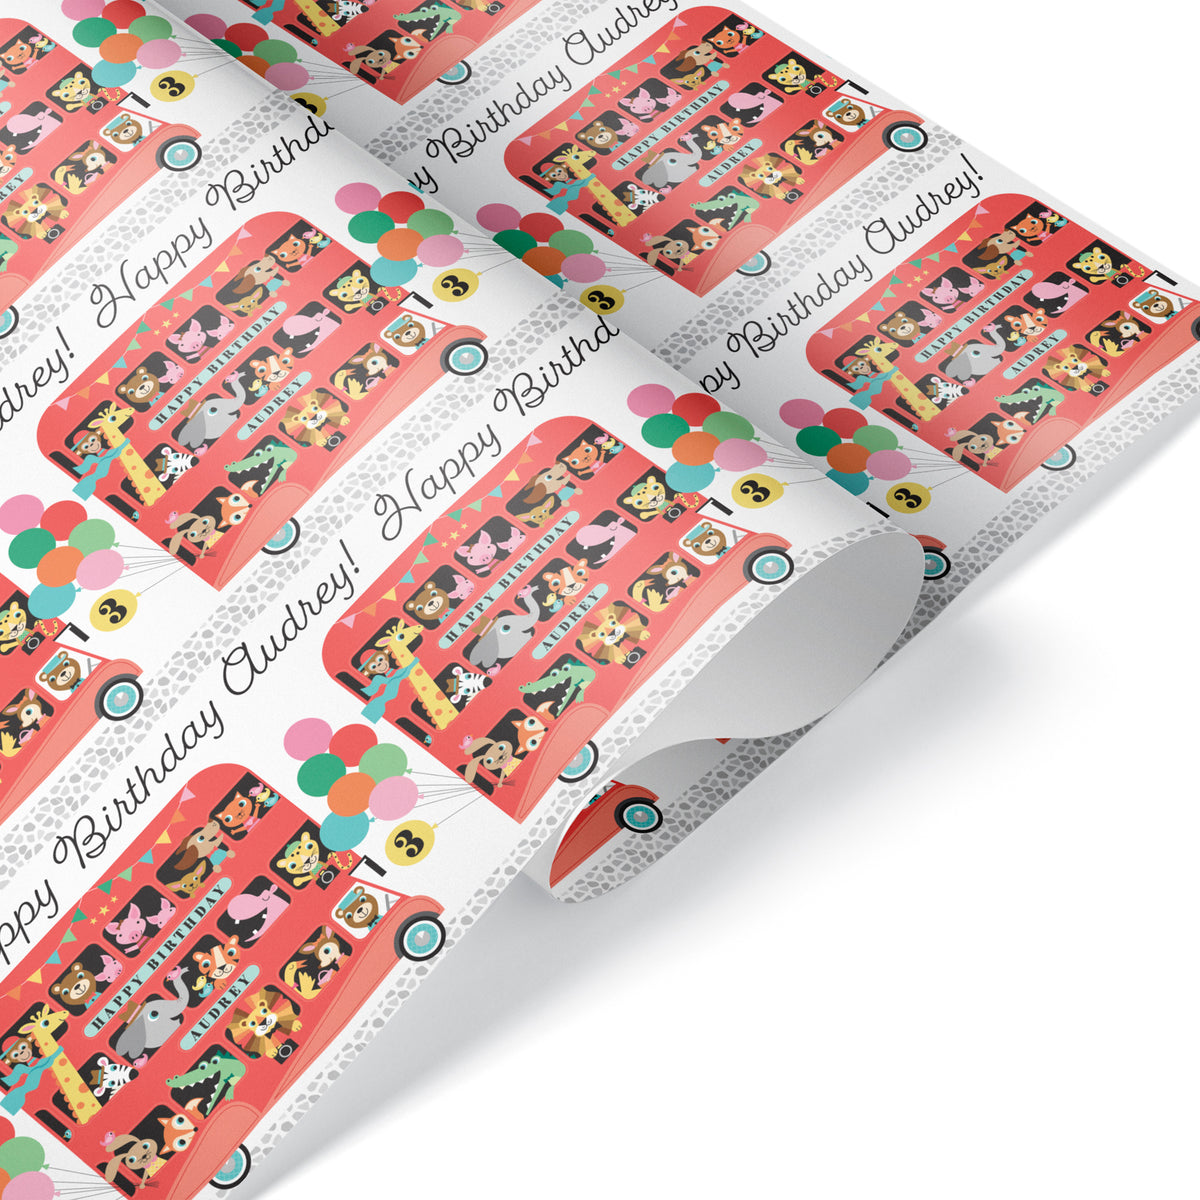 Animal Zoo London Bus Birthday Wrapping Paper - Personalized